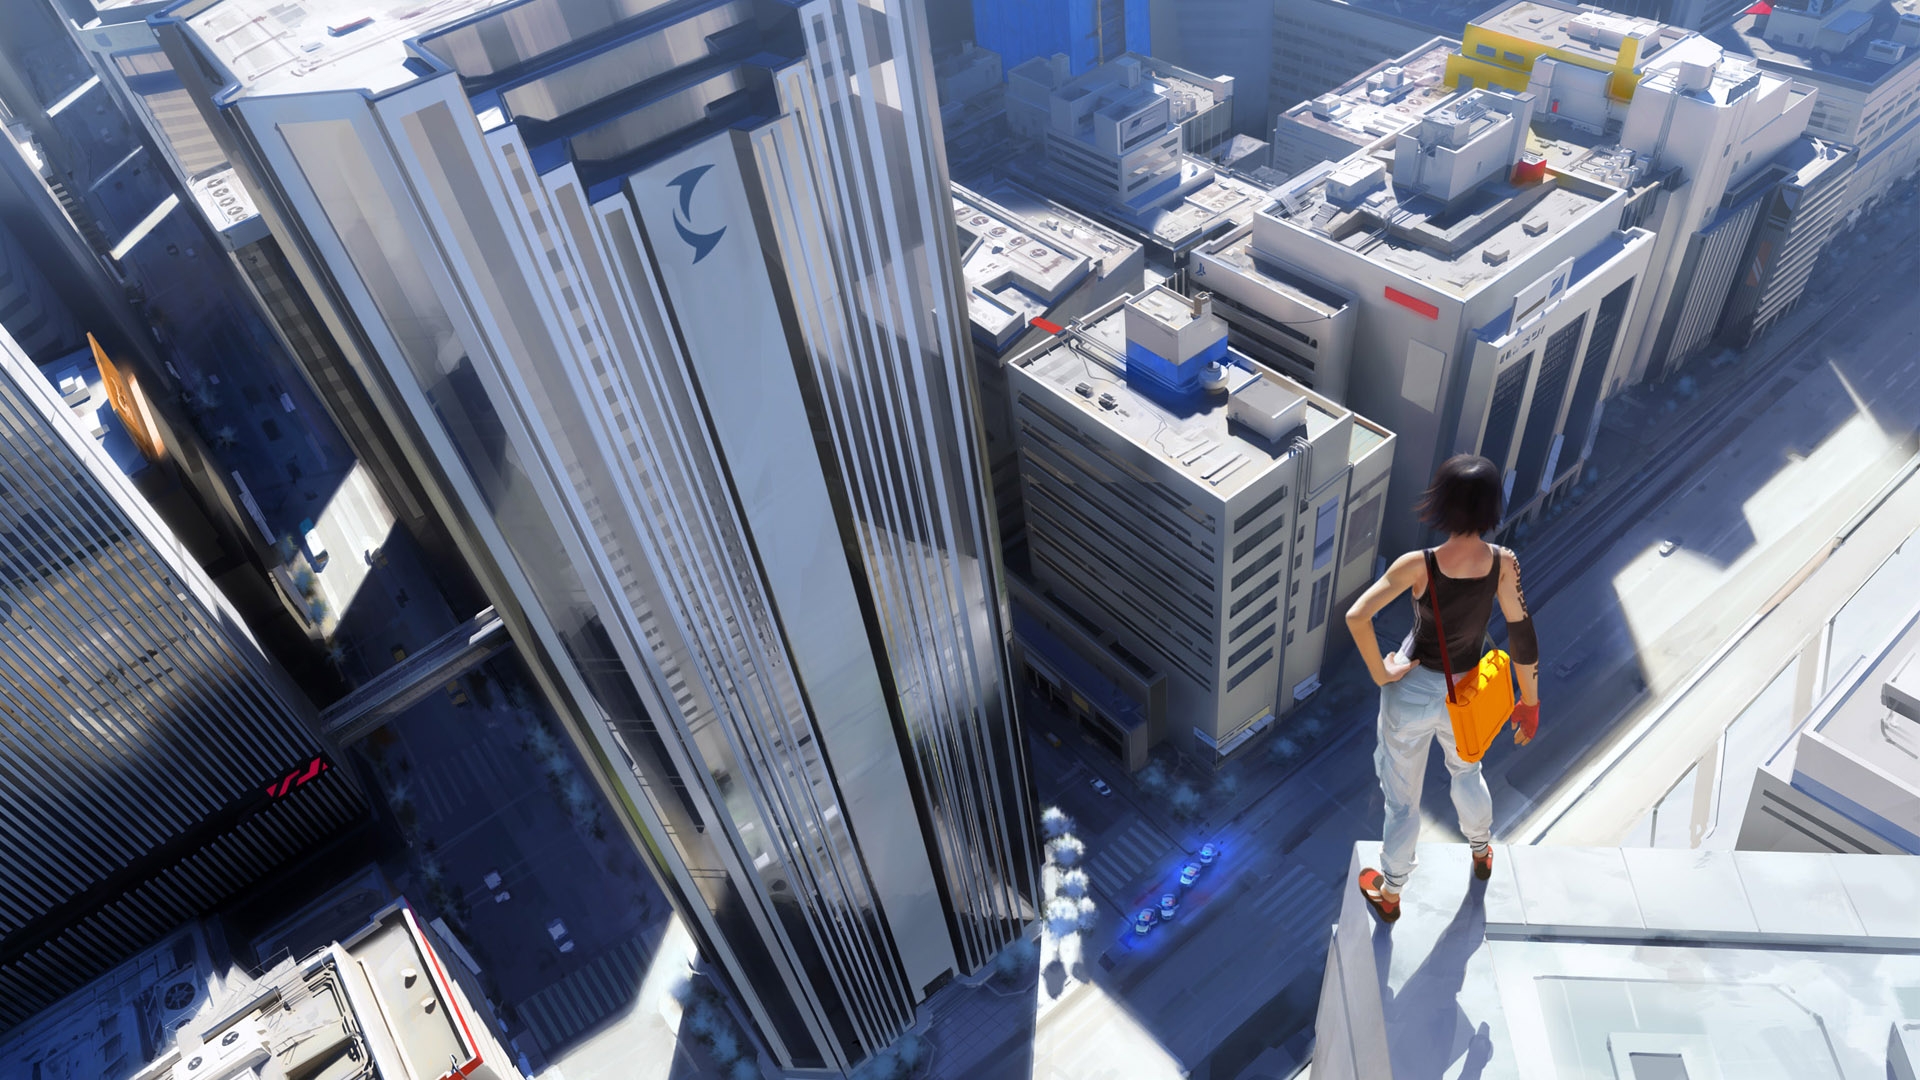 A futuristic city skyline with towering buildings, reminiscent of the video game Mirror's Edge.